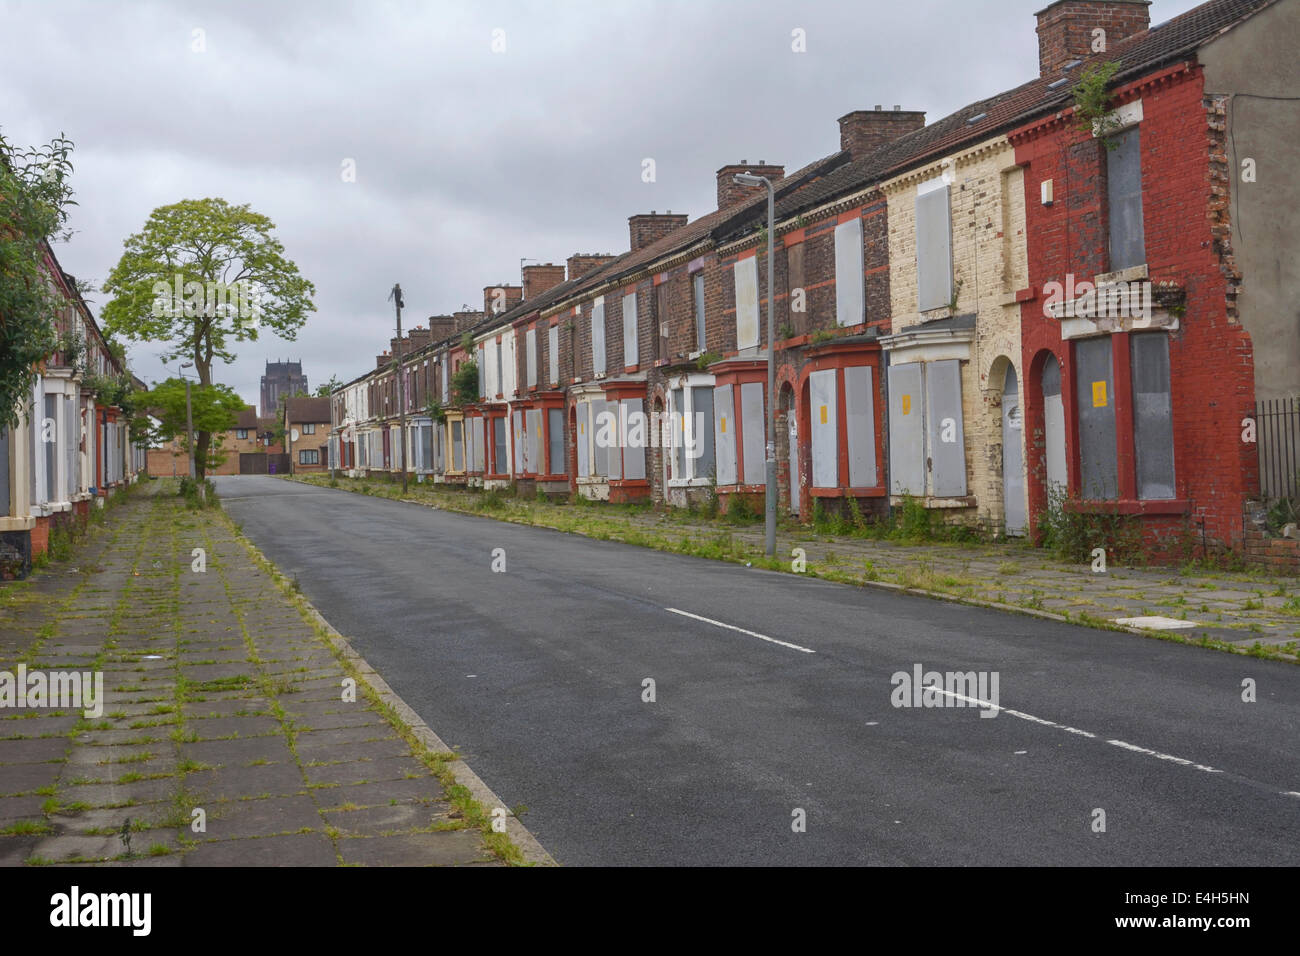 an-area-of-toxteth-in-liverpool-8-known-as-the-welsh-streets-due-to-E4H5HN.jpg